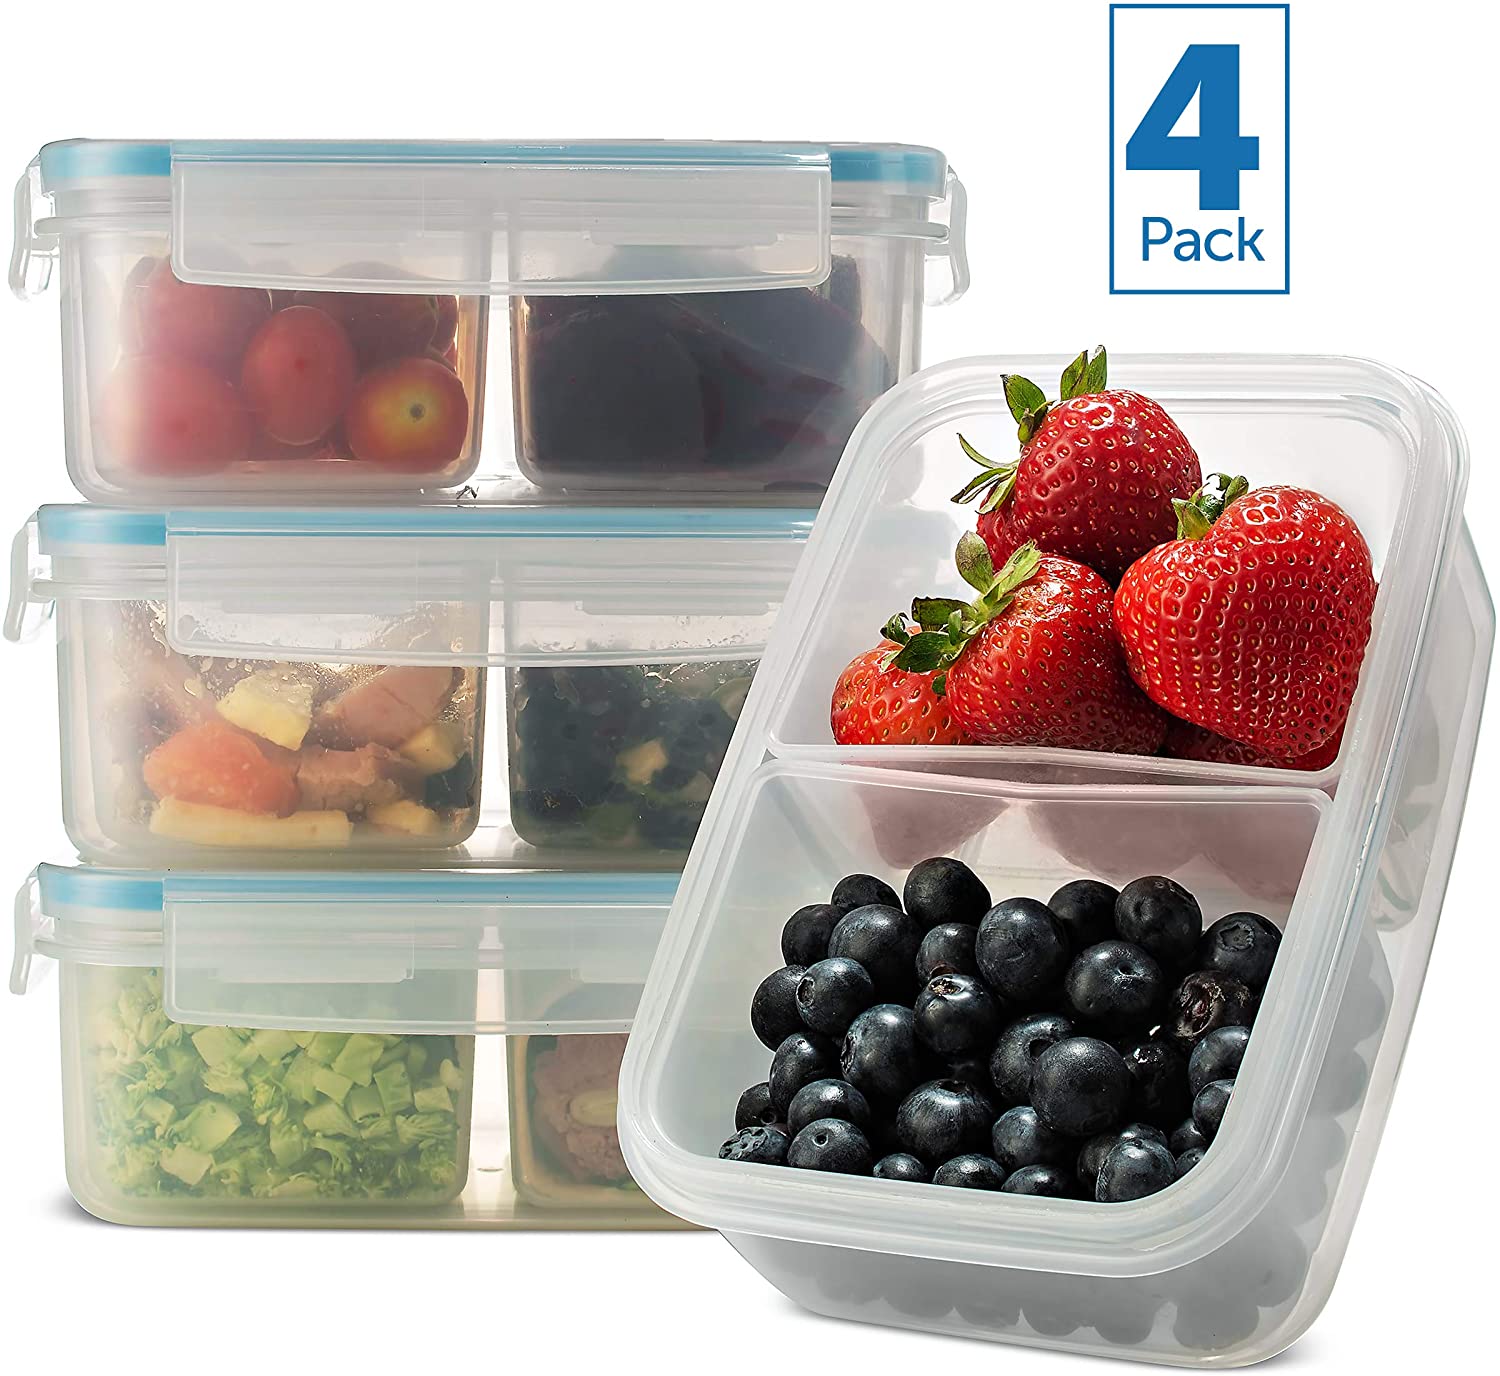 Komax Biokips Rectangular Food Storage Container With Separator, 670 ml - Whole and All